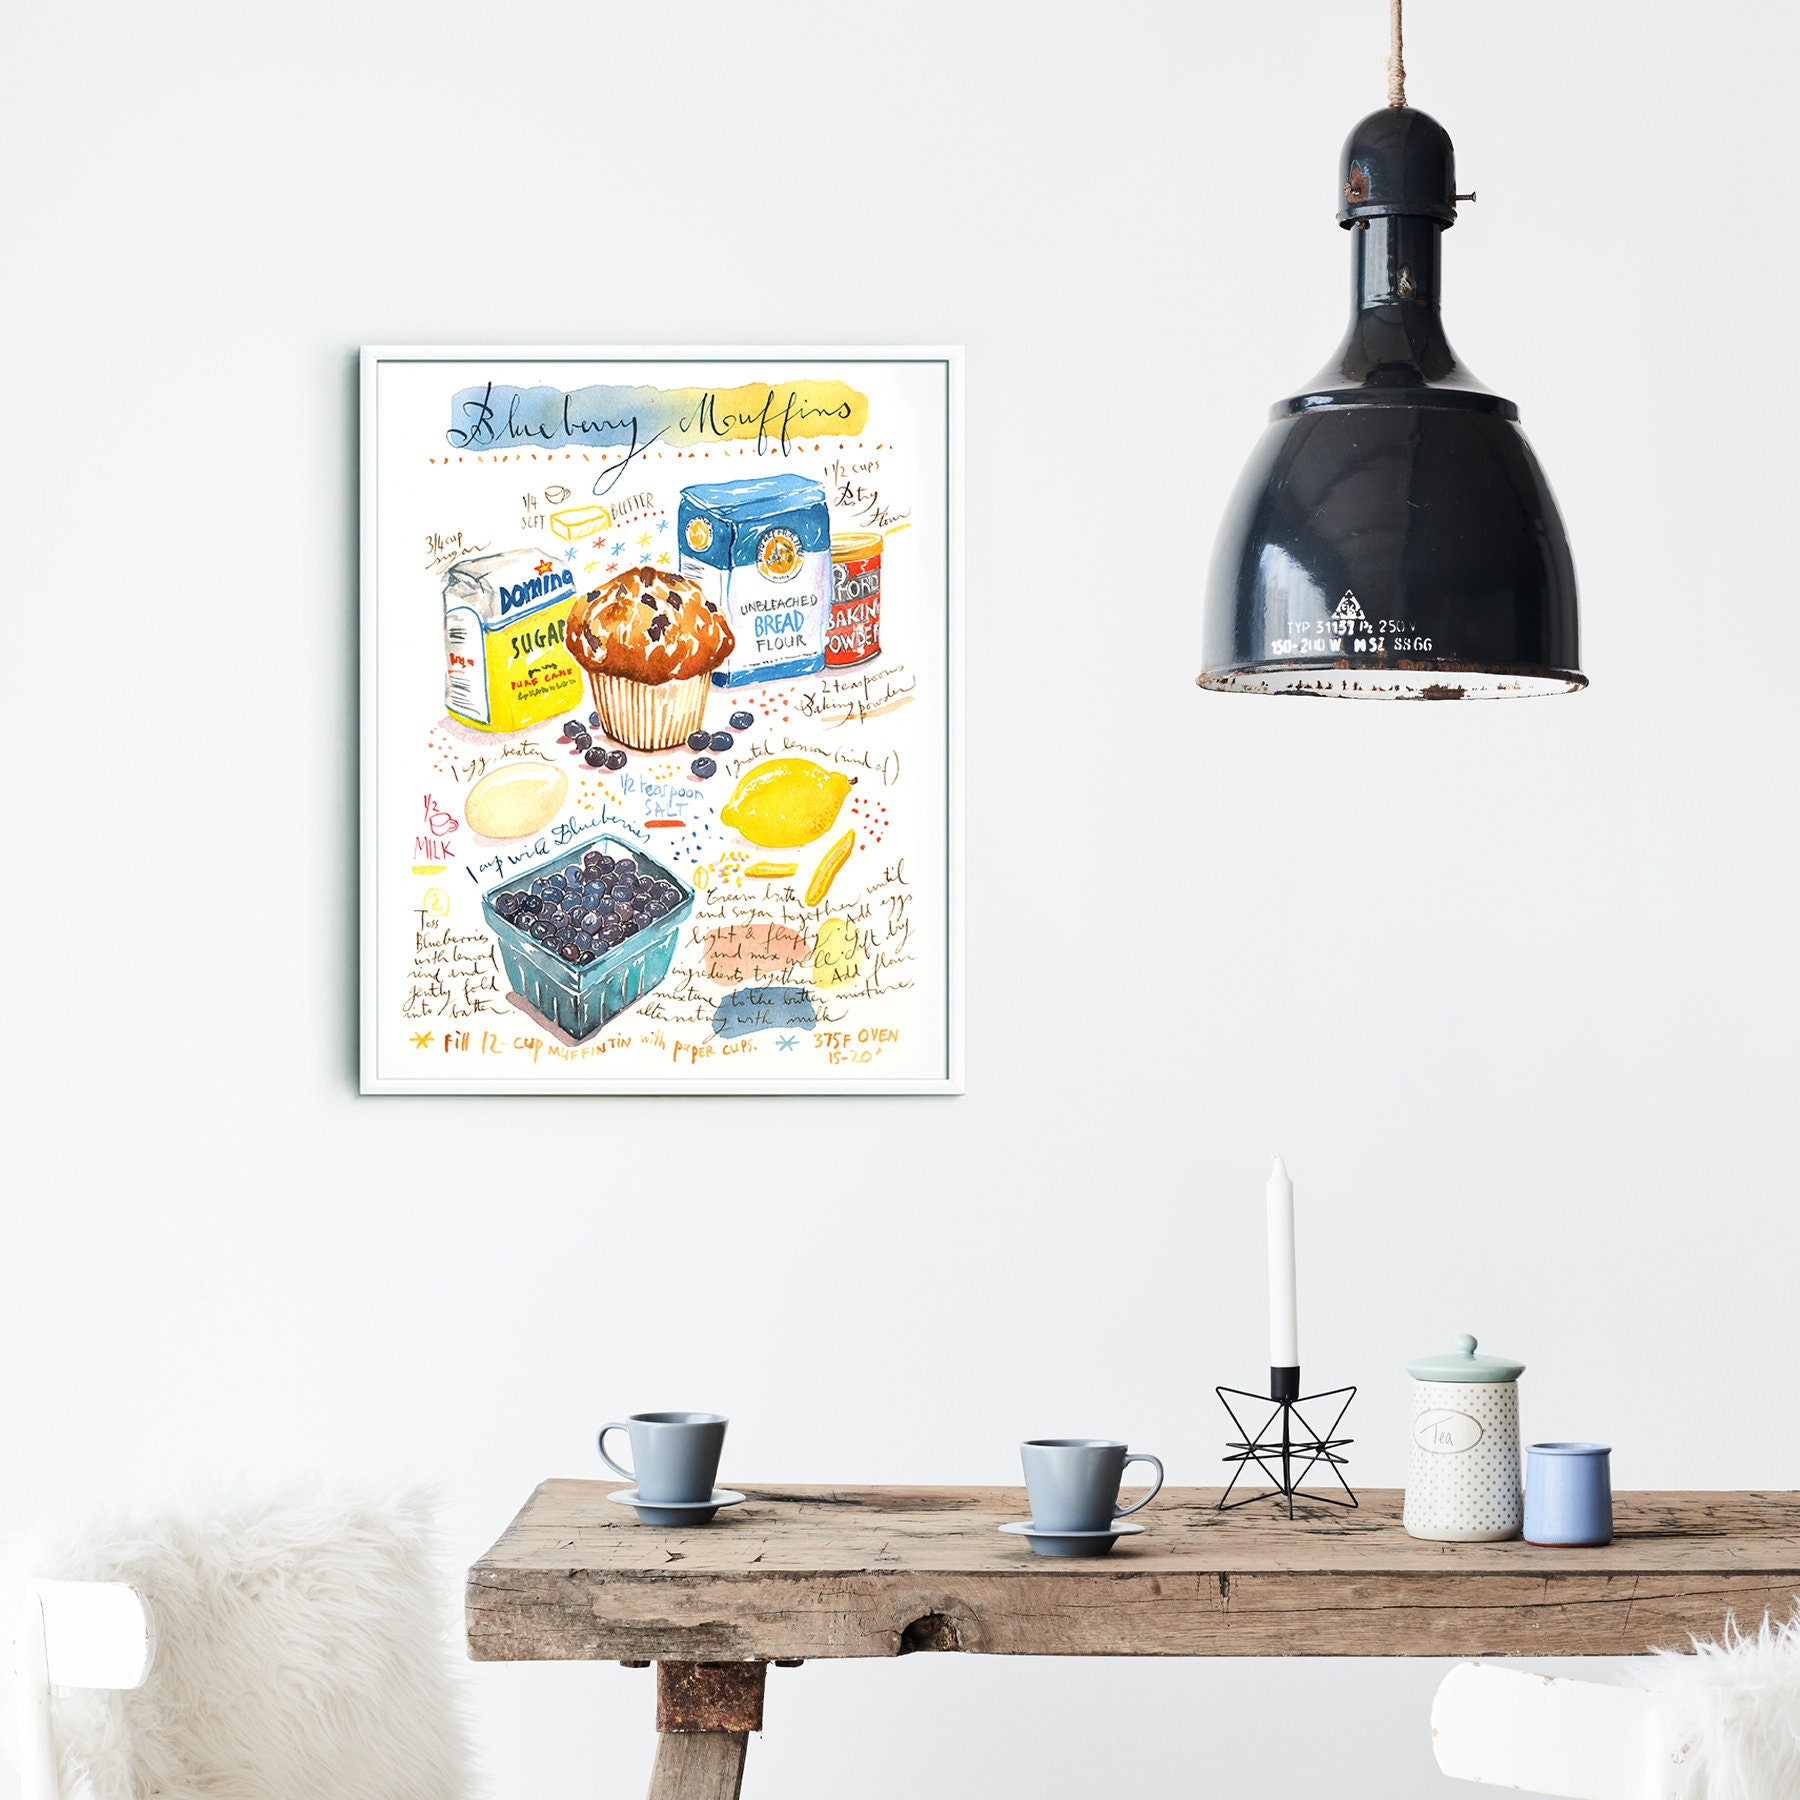 Etsy Bakery Decor, Signed Watercolor Muffin Print, Foodie Blueberry Kitchen Art, Recipe Hanging Yummy Wall Art Painting, - Poster, Gift, Food Wall